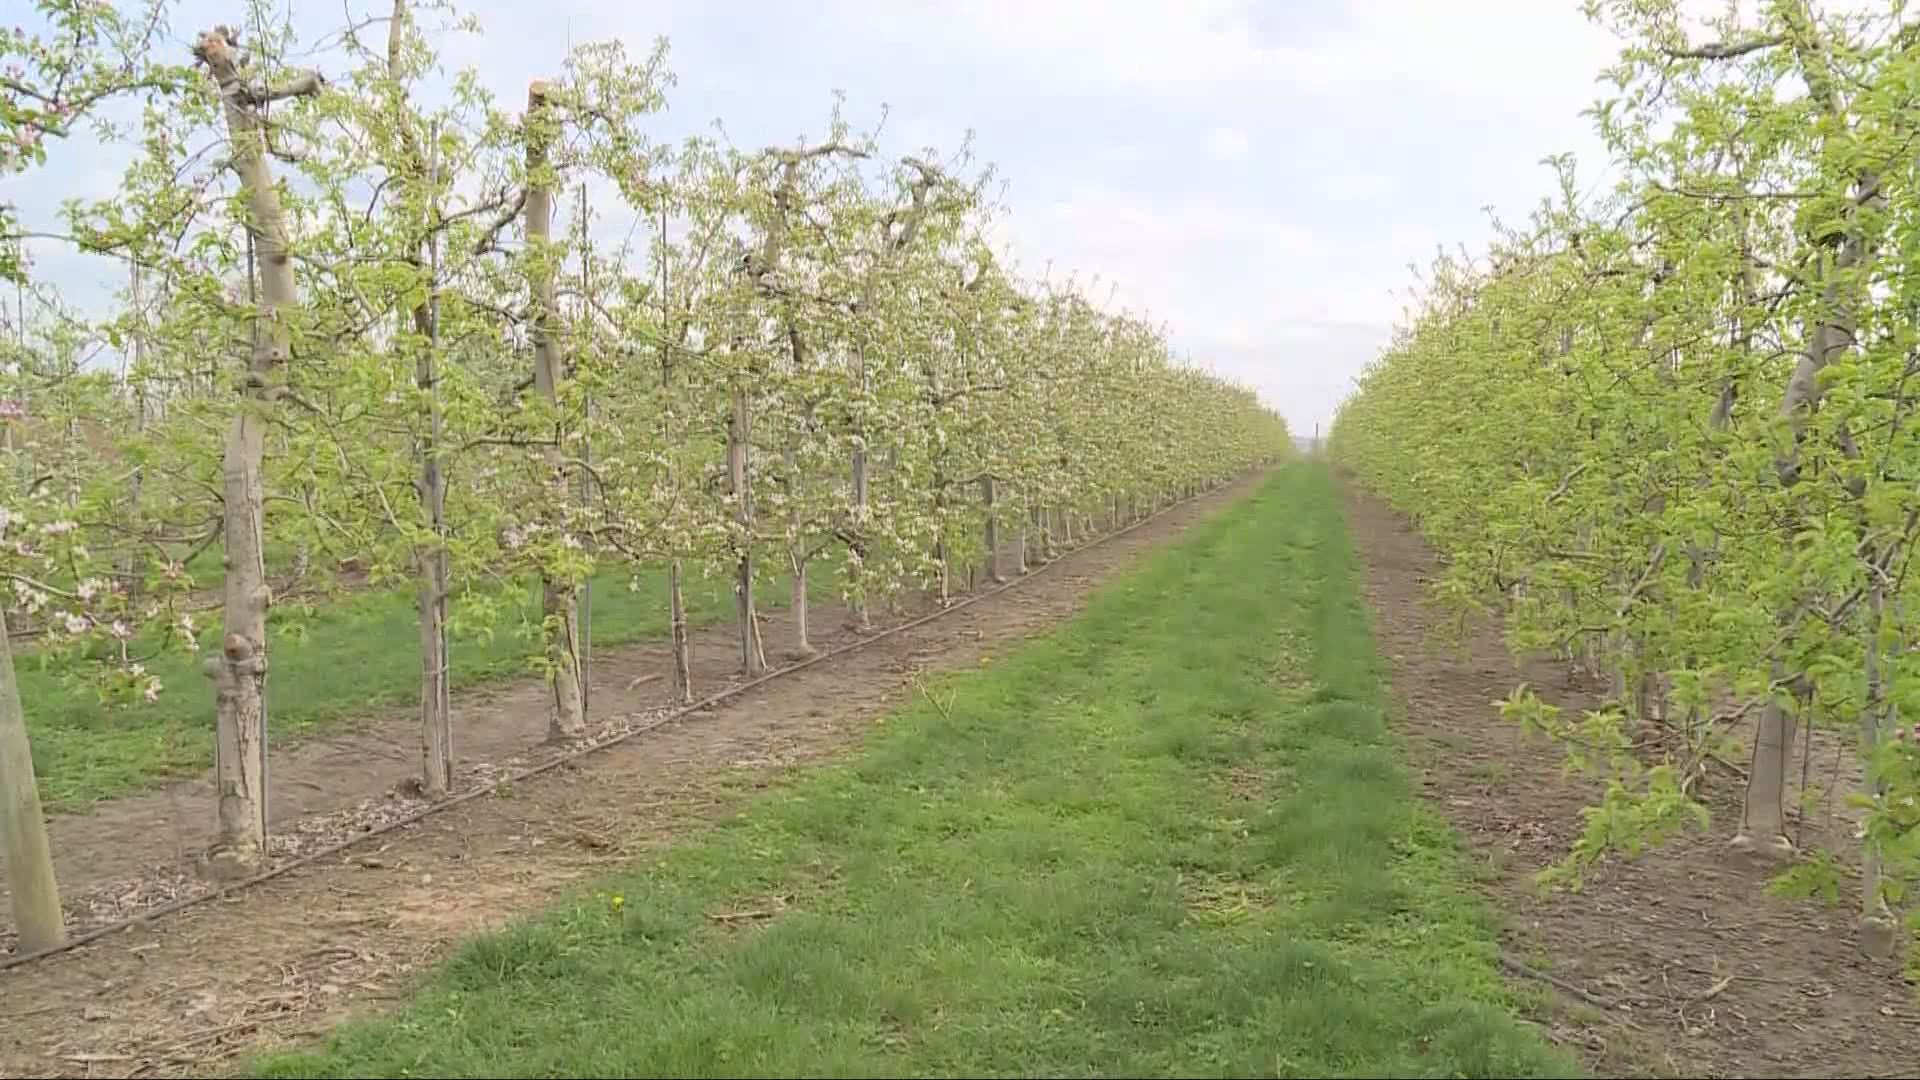 Freezing temperatures can put apple, peach, and pear crops in jeopardy.